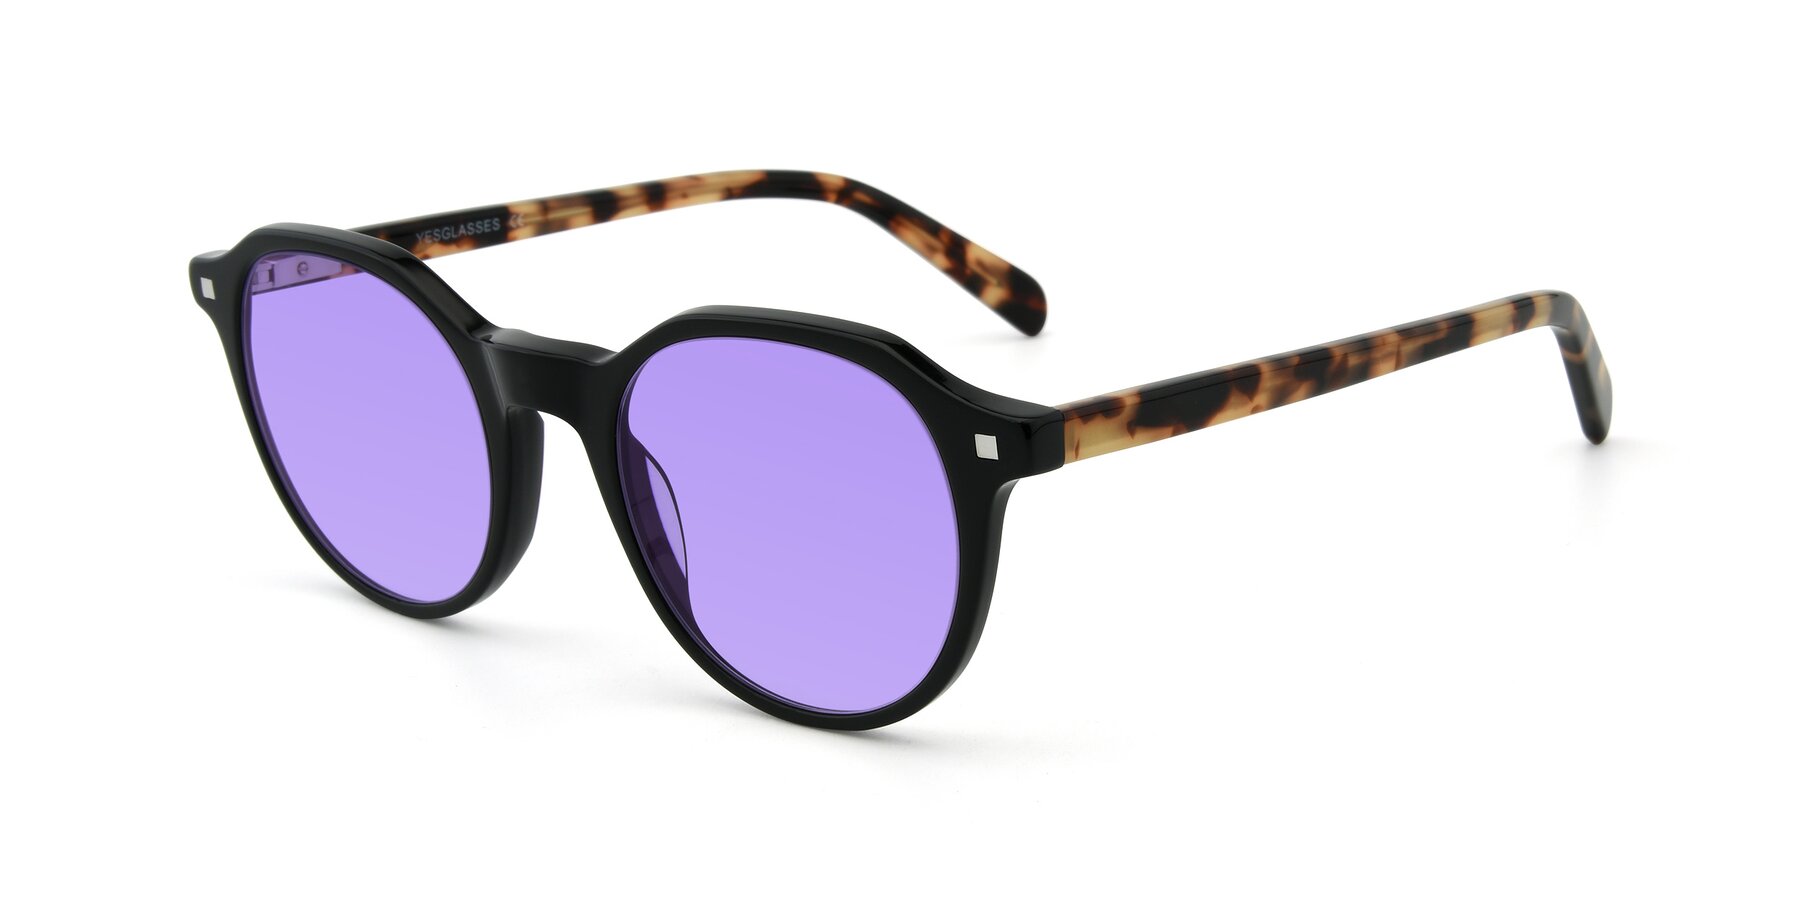 Angle of 17425 in Black with Medium Purple Tinted Lenses